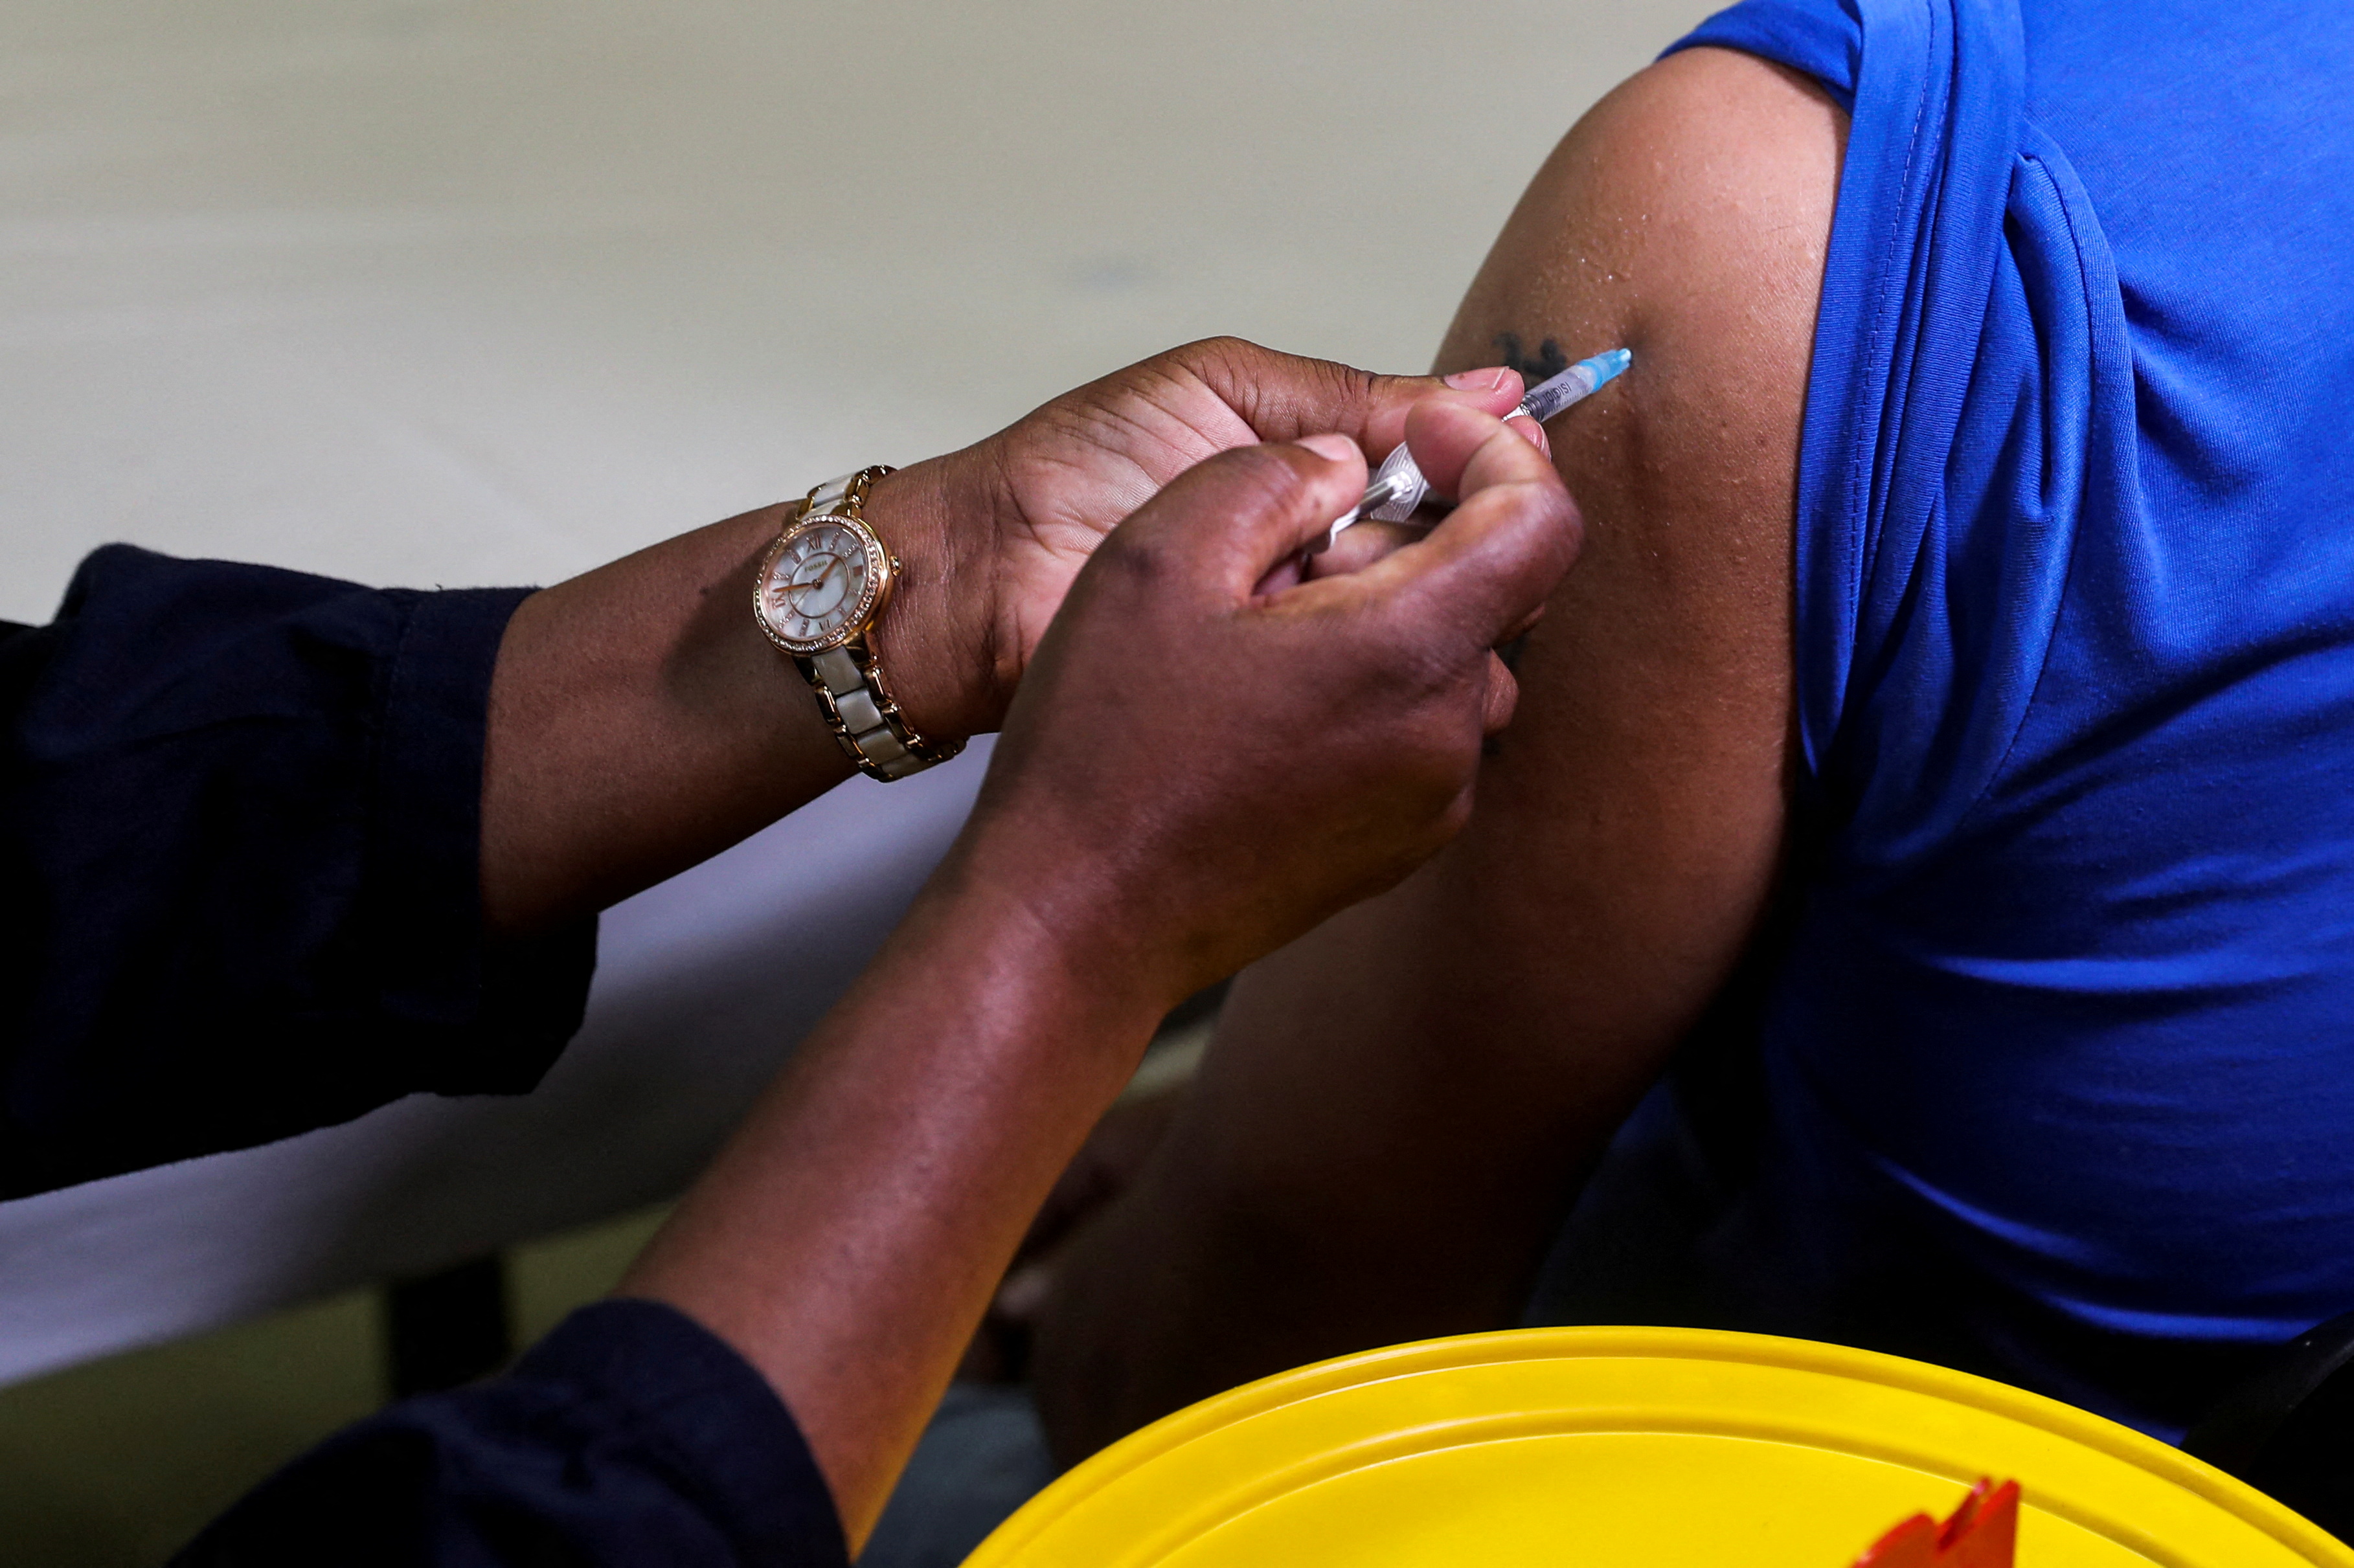   A healthcare worker administers the Pfizer coronavirus disease (COVID-19) vaccine to a man, amidst the spread of the SARS-CoV-2 variant Omicron, in Johannesburg, South Africa, December 9, 2021. REUTERS/Sumaya Hisham/File Photo